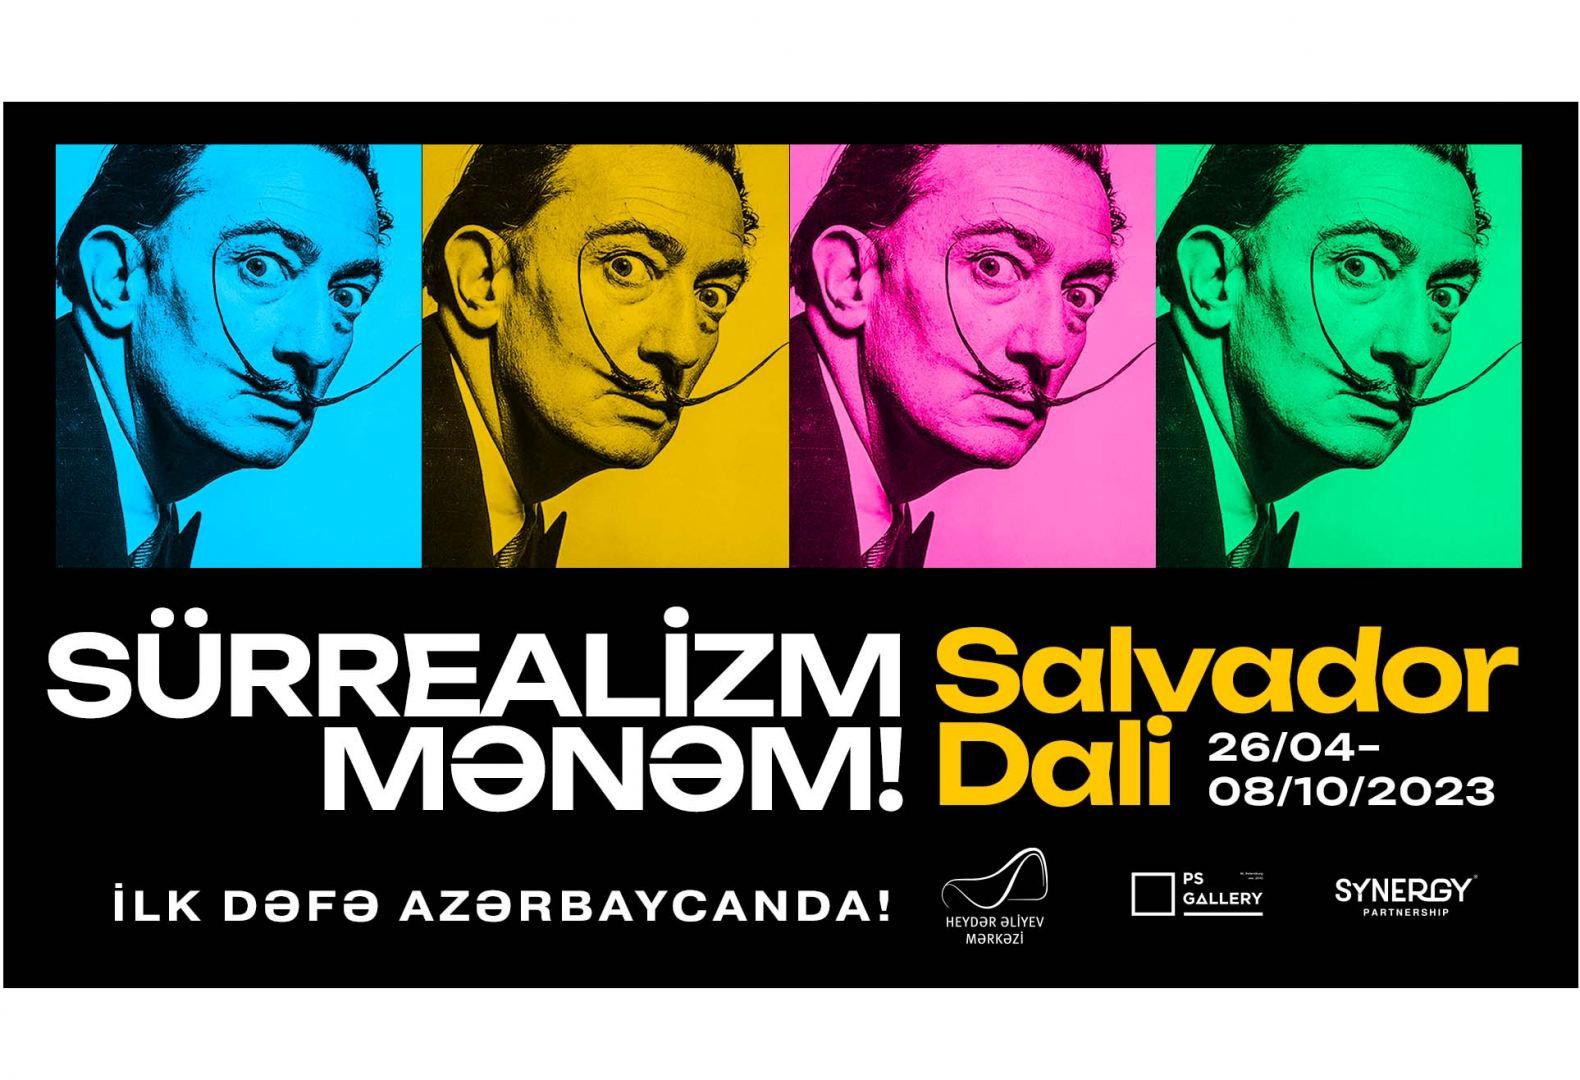 Salvador Dali's art works to be shown for first time at Heydar Aliyev Center